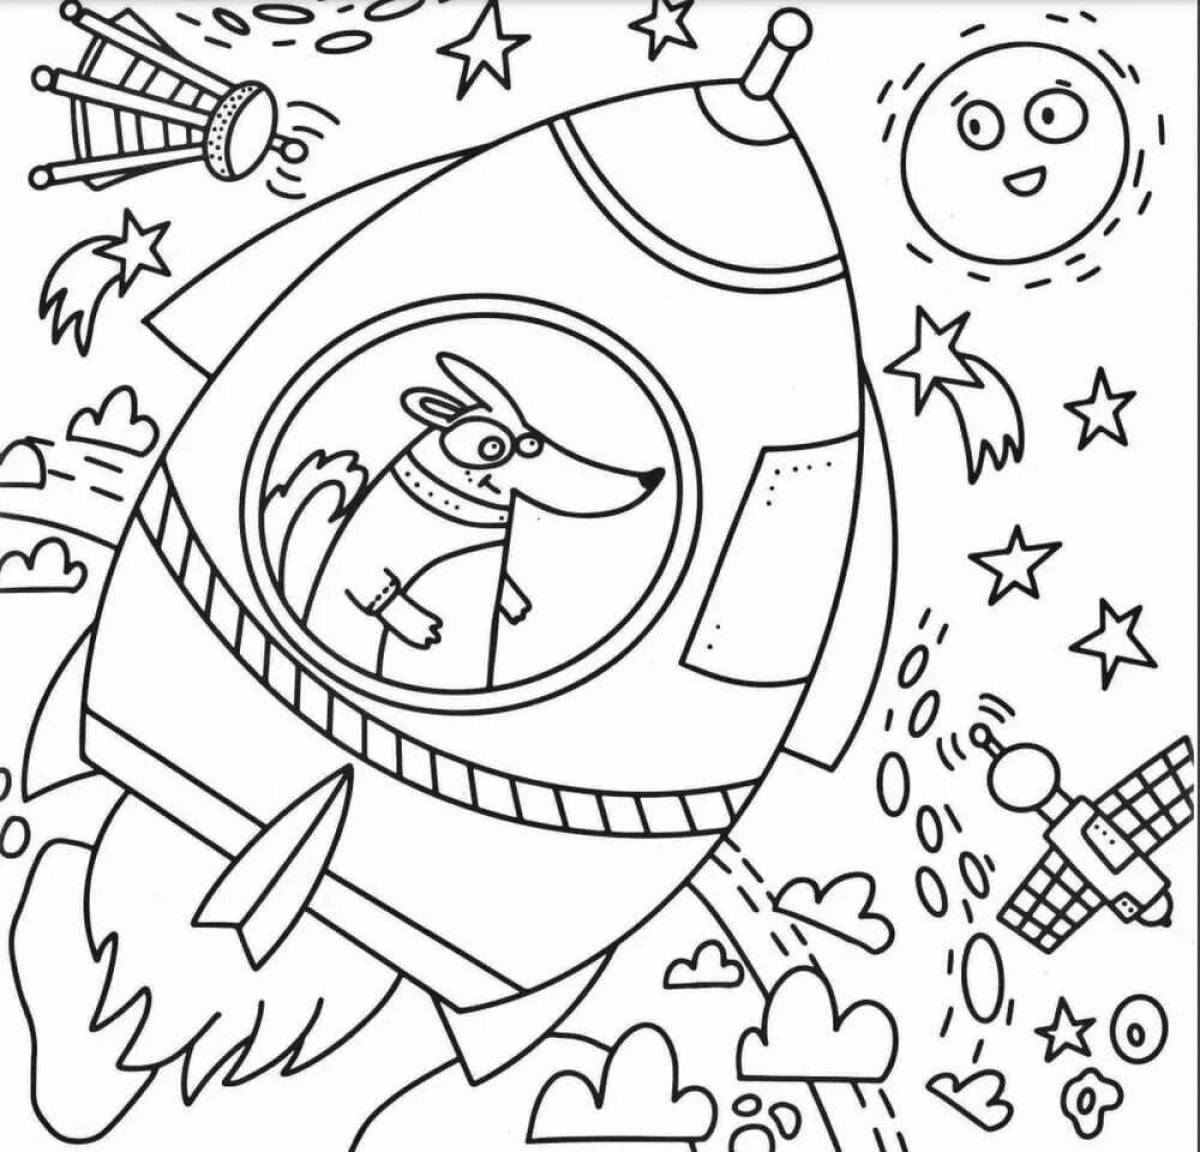 Galactic space coloring book